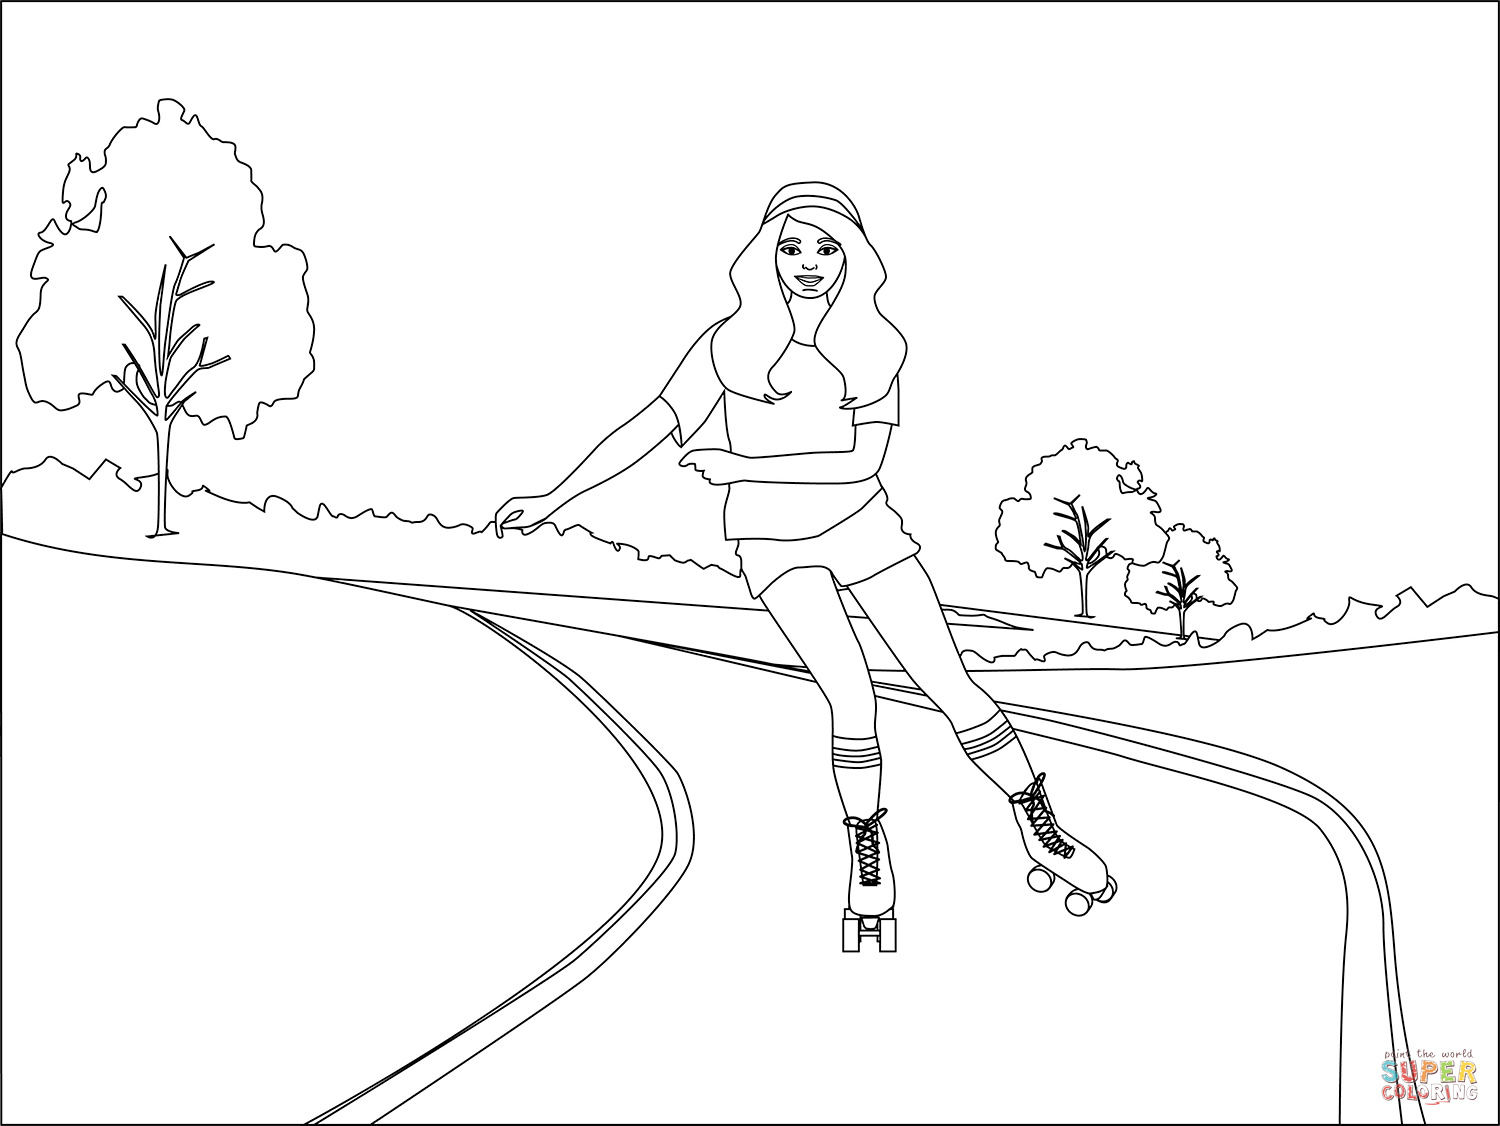 Rollerblading colouring